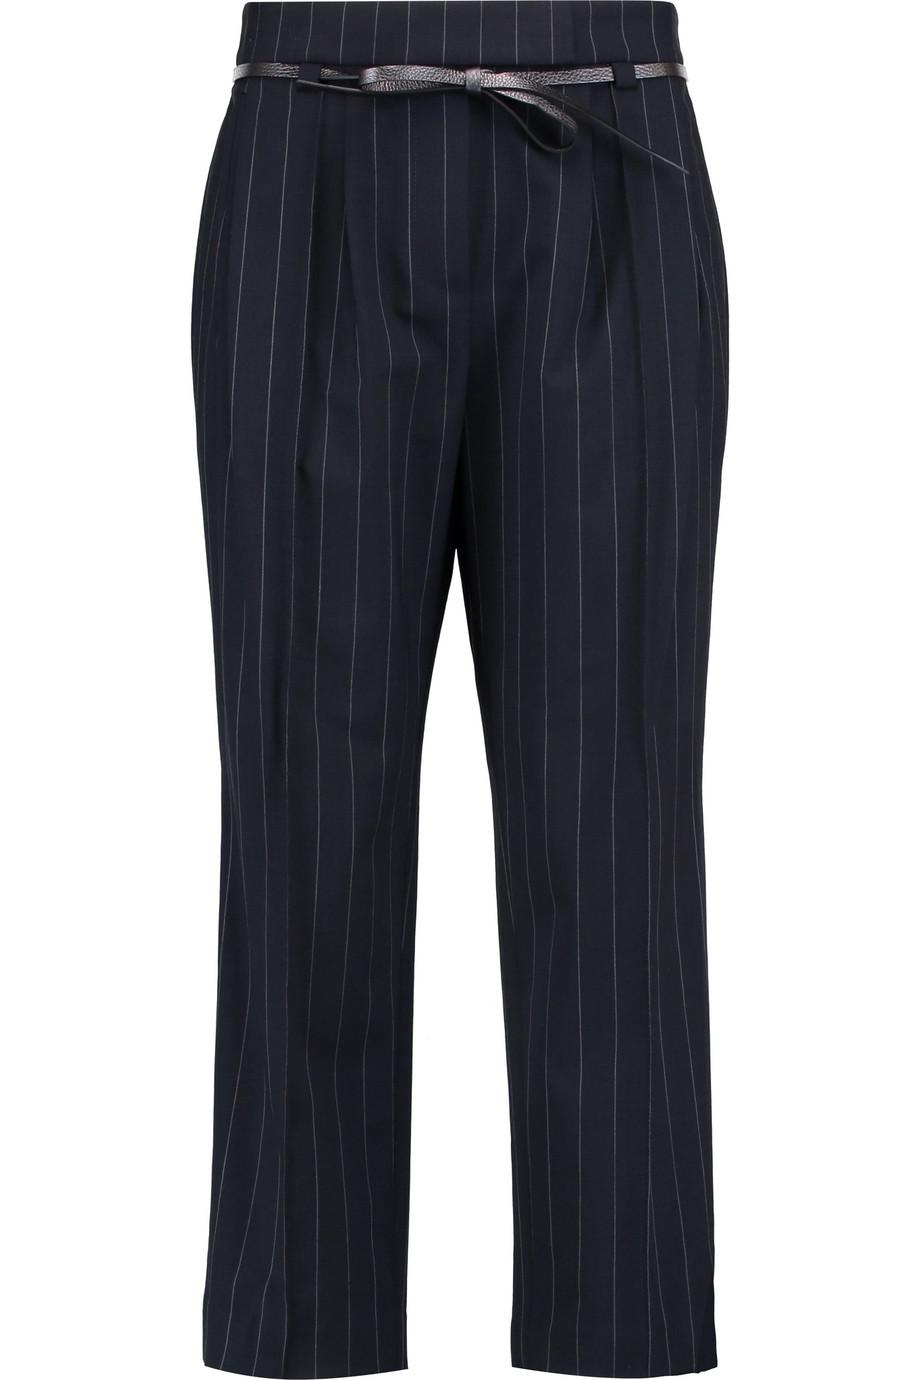 Brunello Cucinelli Belted Pinstriped Wool-blend Crepe Pants | ModeSens